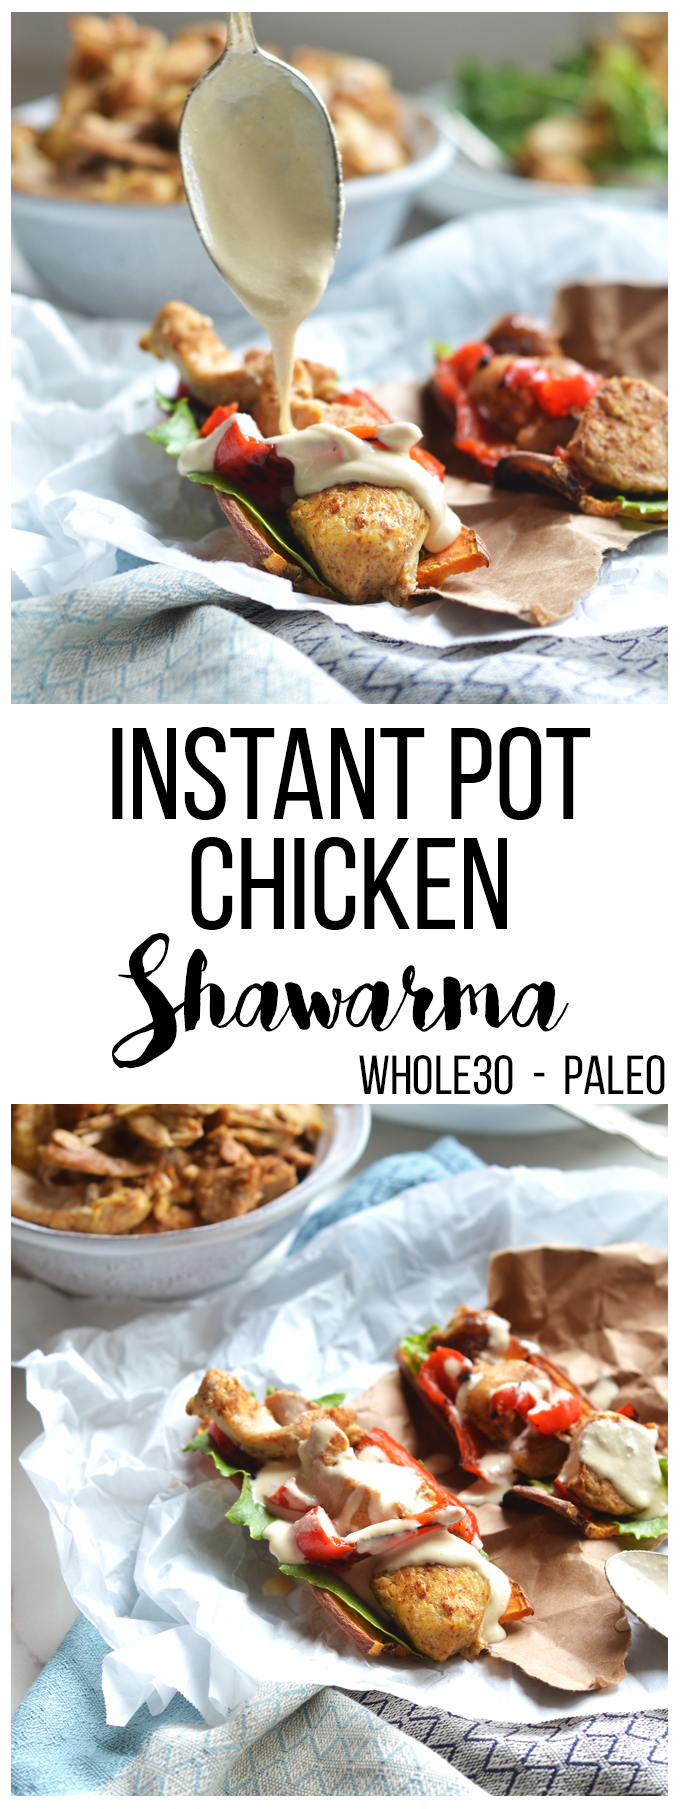 This instant pot chicken shawarma is packed with flavor, whole30, paleo and can be made in a slow cooker!